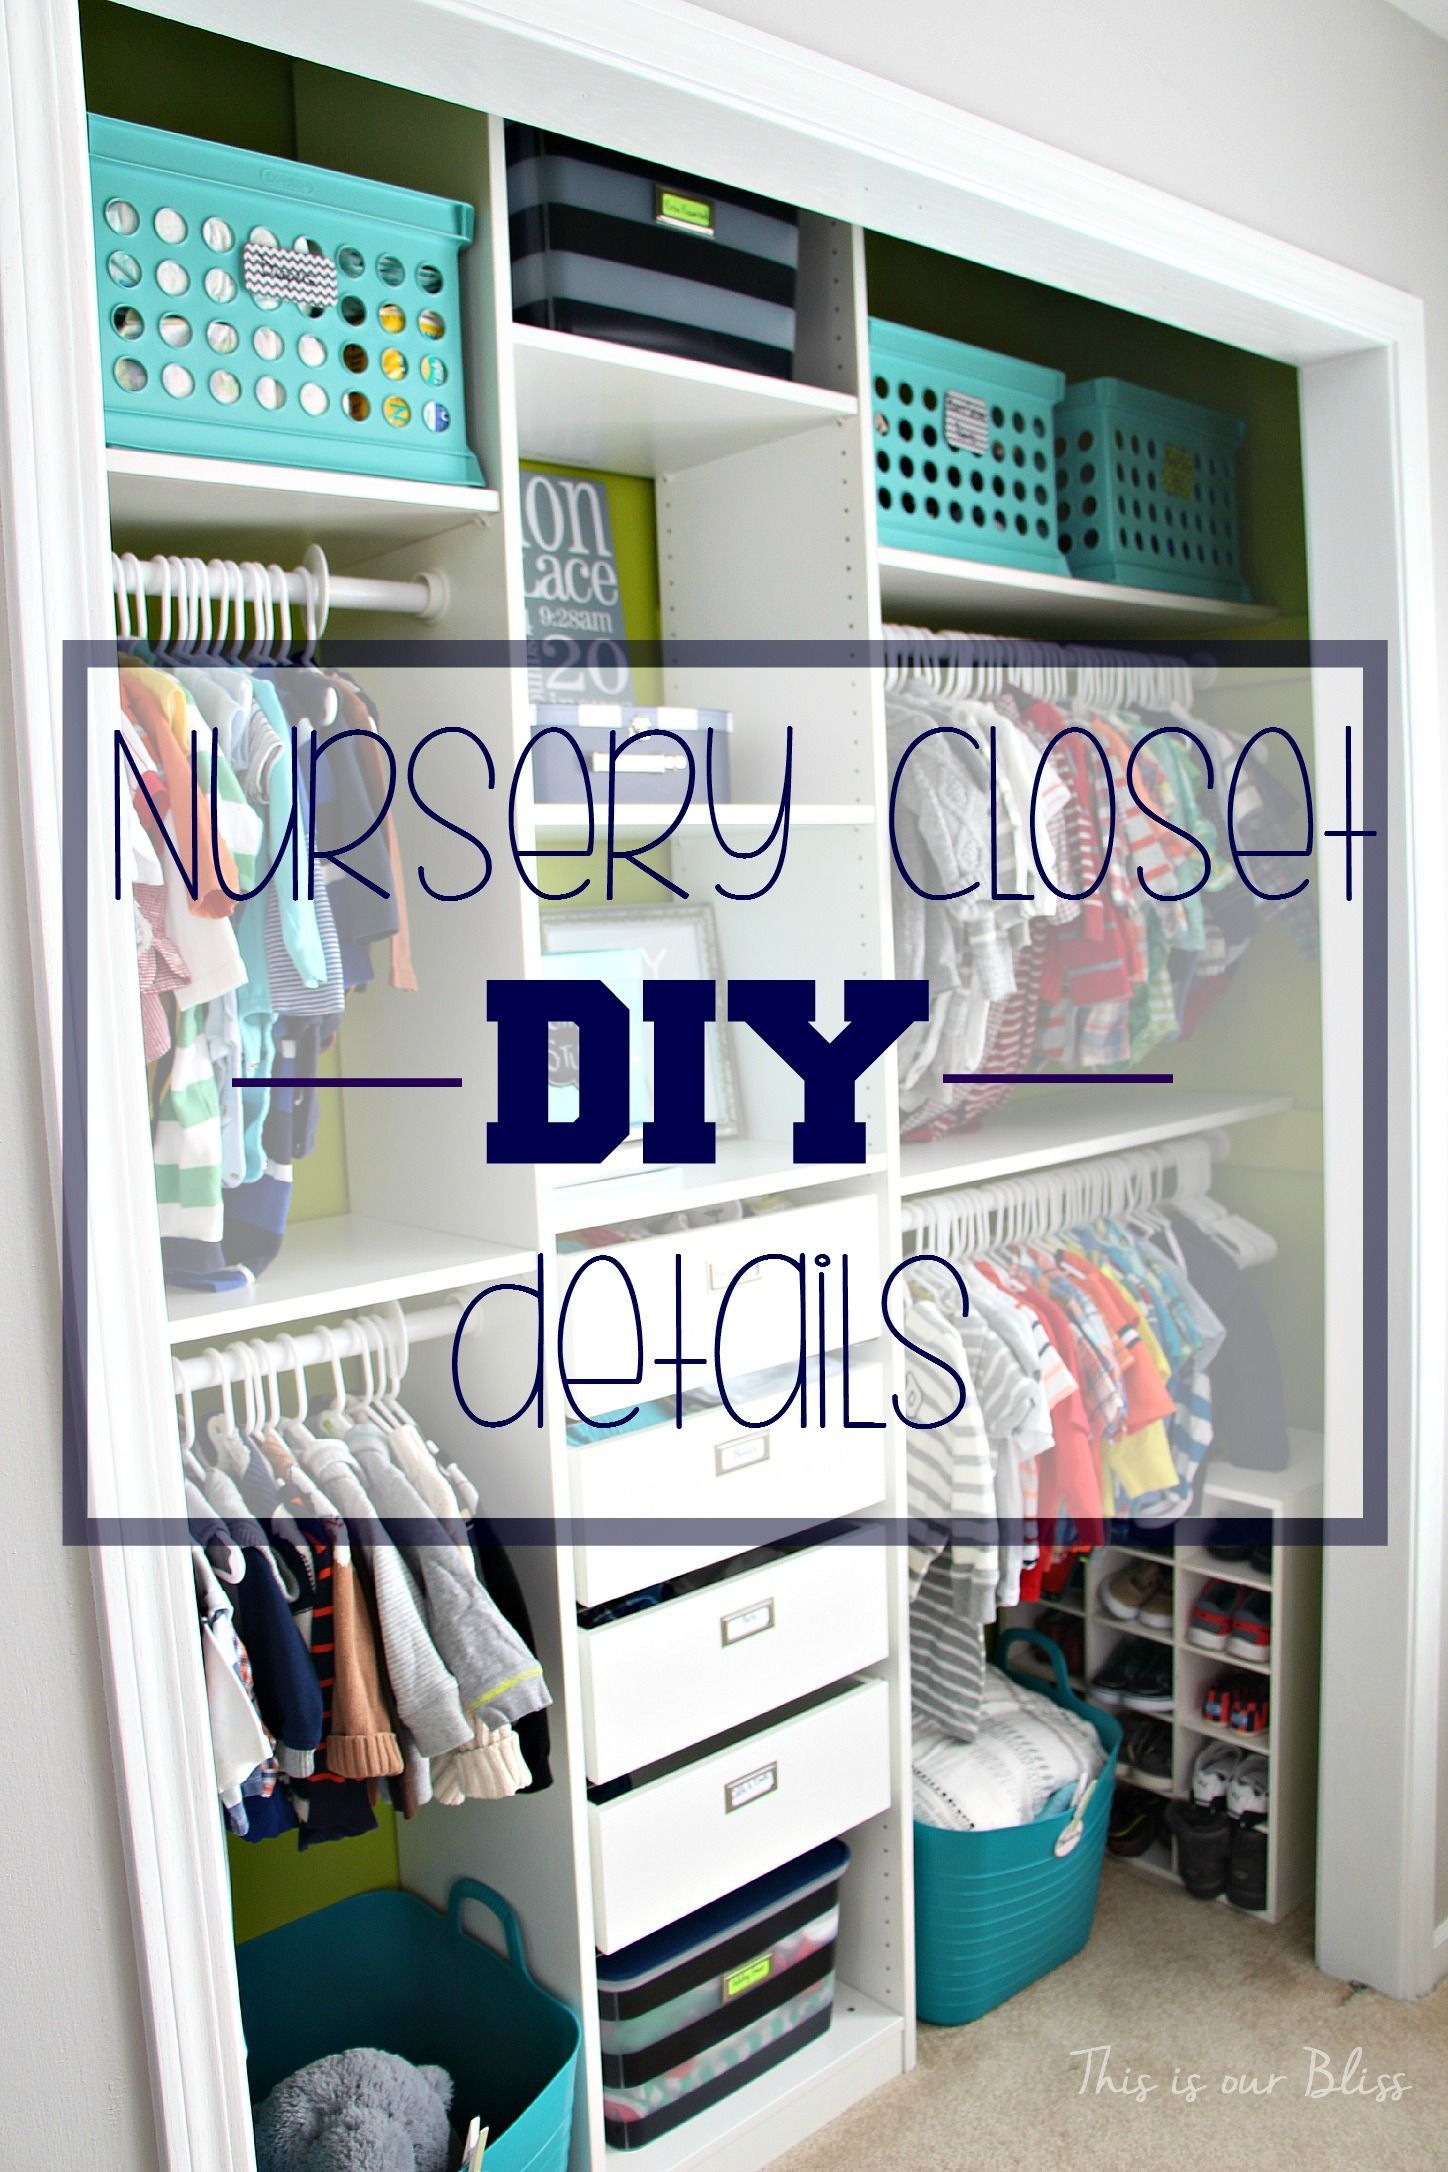 Baby boy nursery closet – DIY nursery closet details  – navy green gray – This is our Bliss